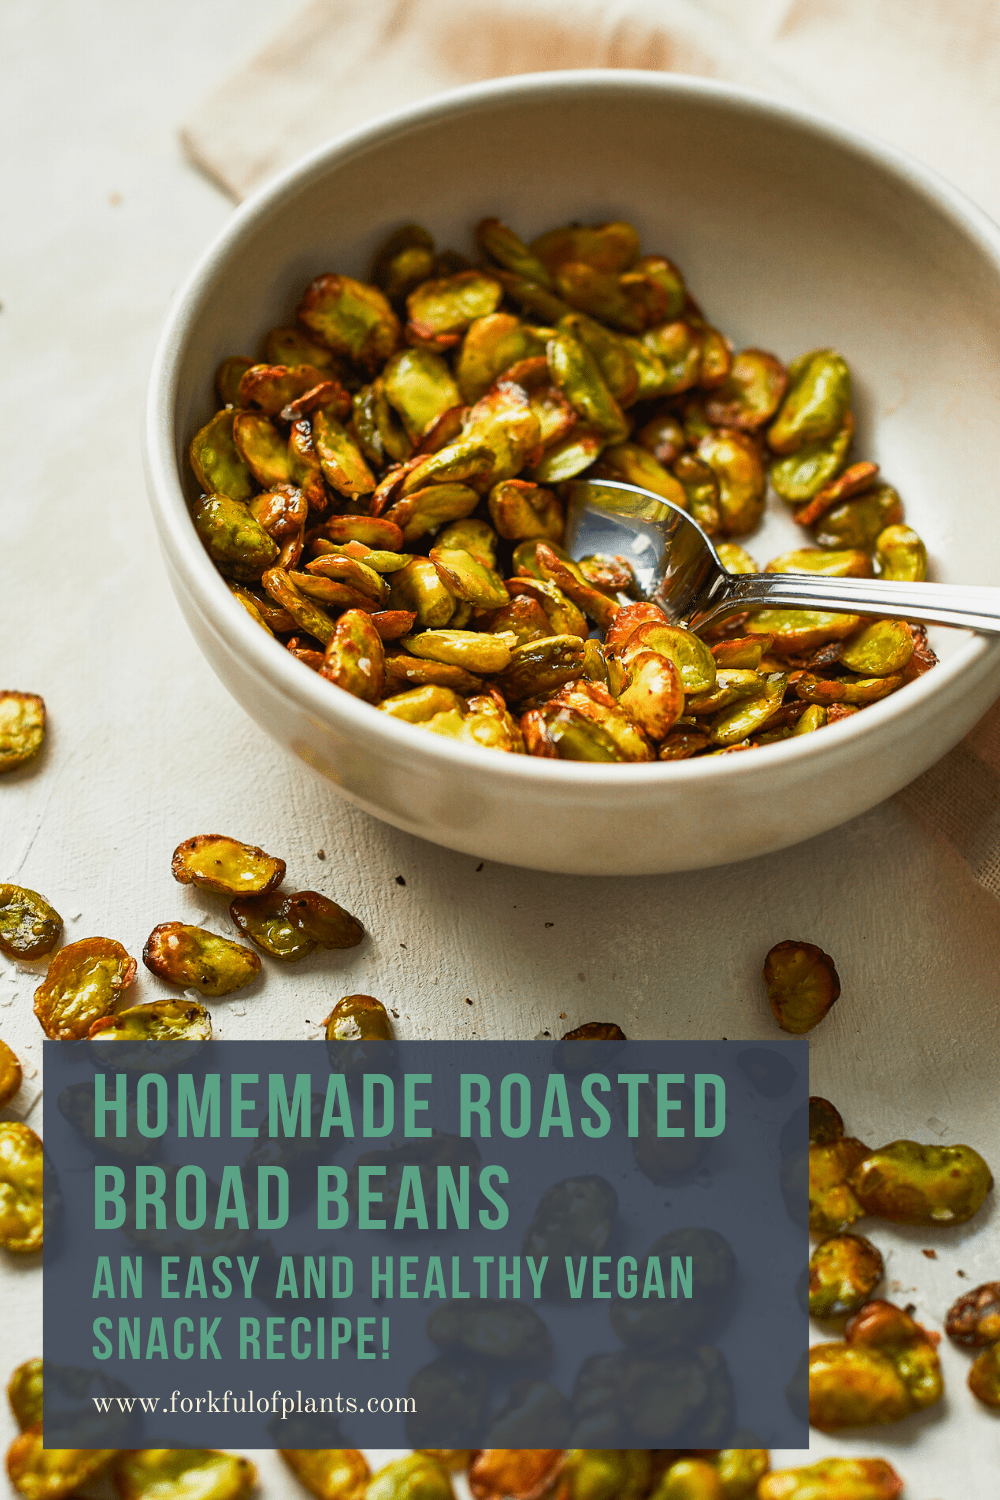 Roasted broad beans pin image